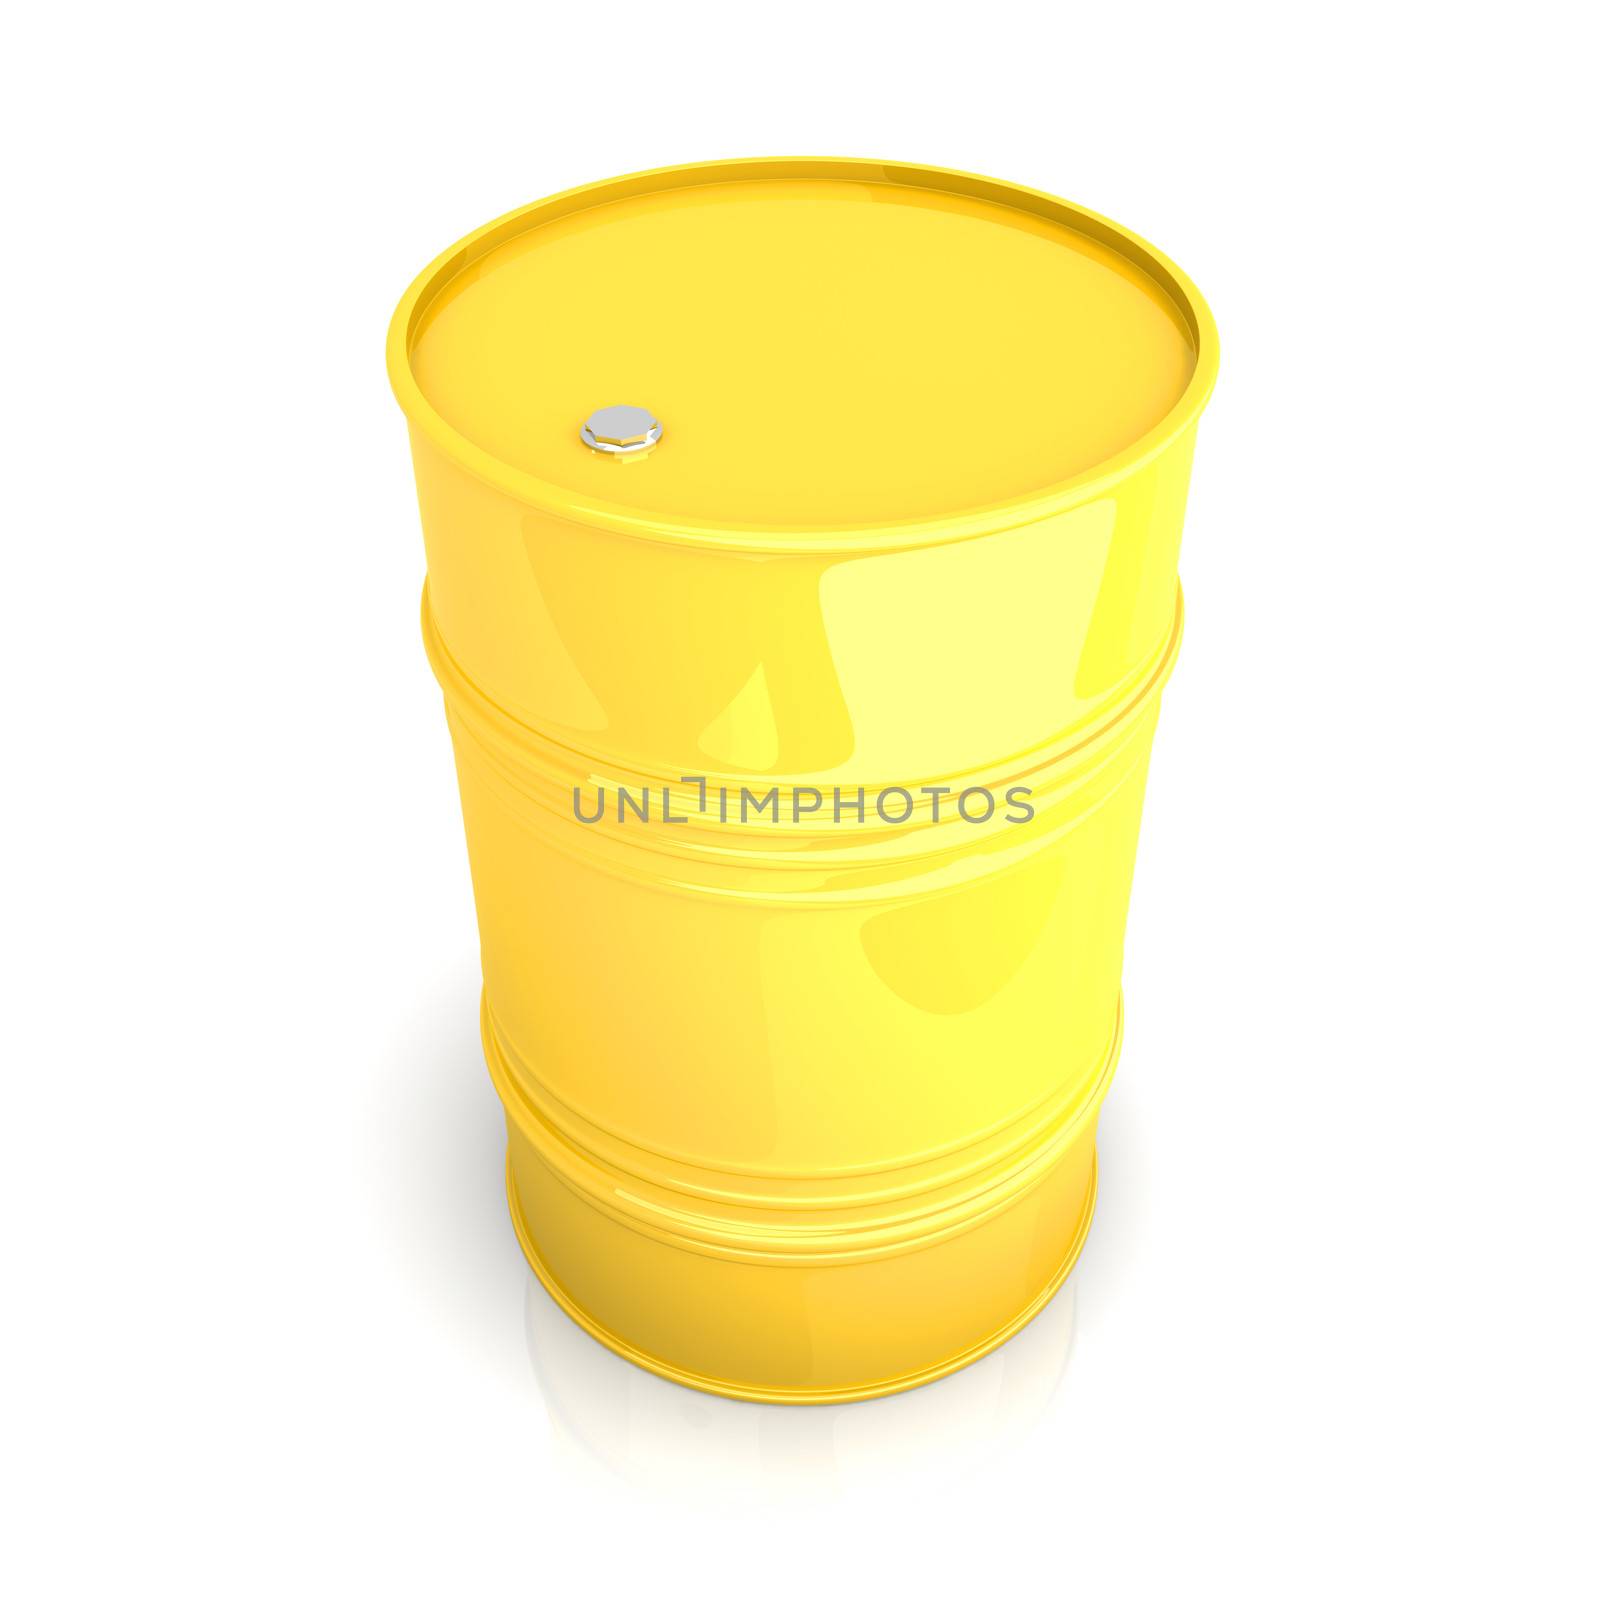 A industrial Barrel. 3D rendered Illustration. Isolated on white.